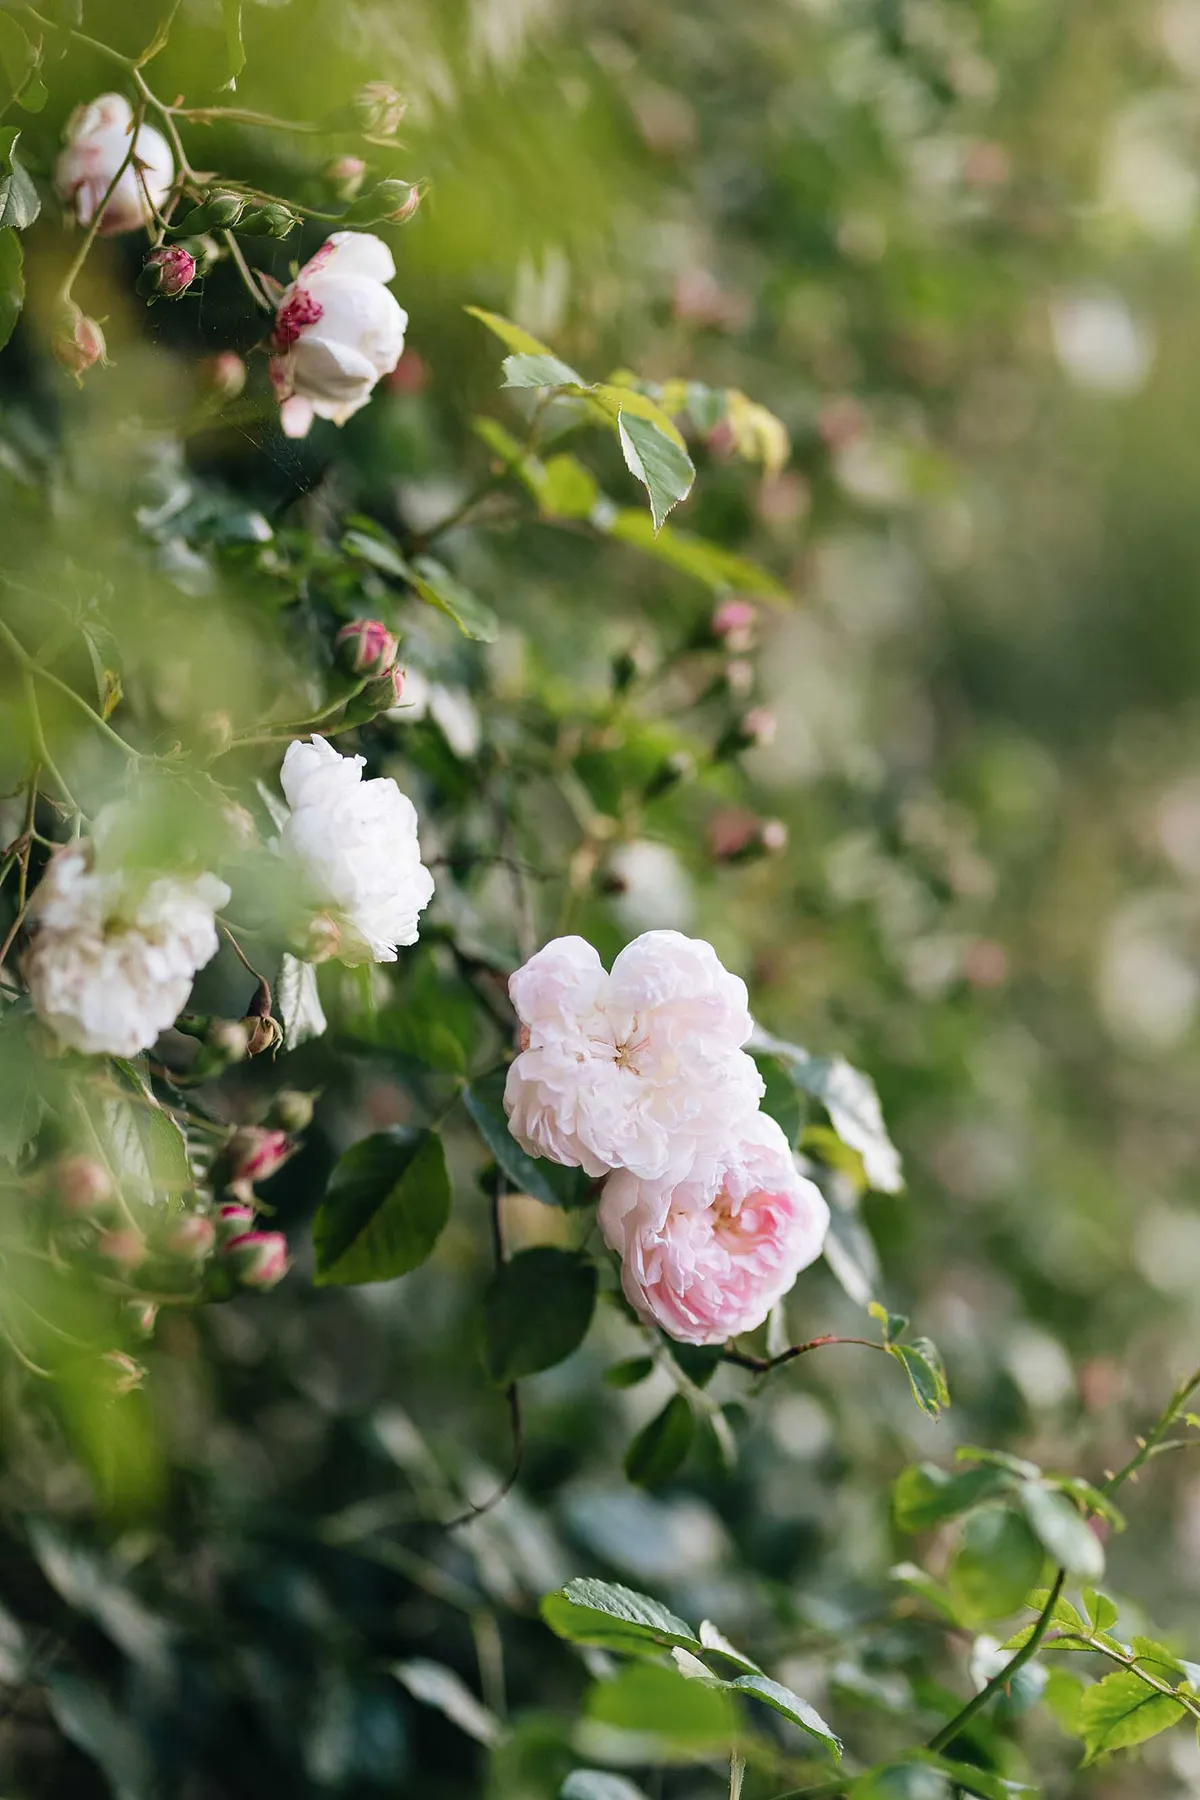 Rosa ‘Princess Louise’, a summer-flowering rambling rose with large clusters of small, blush-pink flowers that fade to white. Its elegant, pliable growth makes it easy to train. It is used here against the Farrowing House, an old stone building that is now used as an office space.